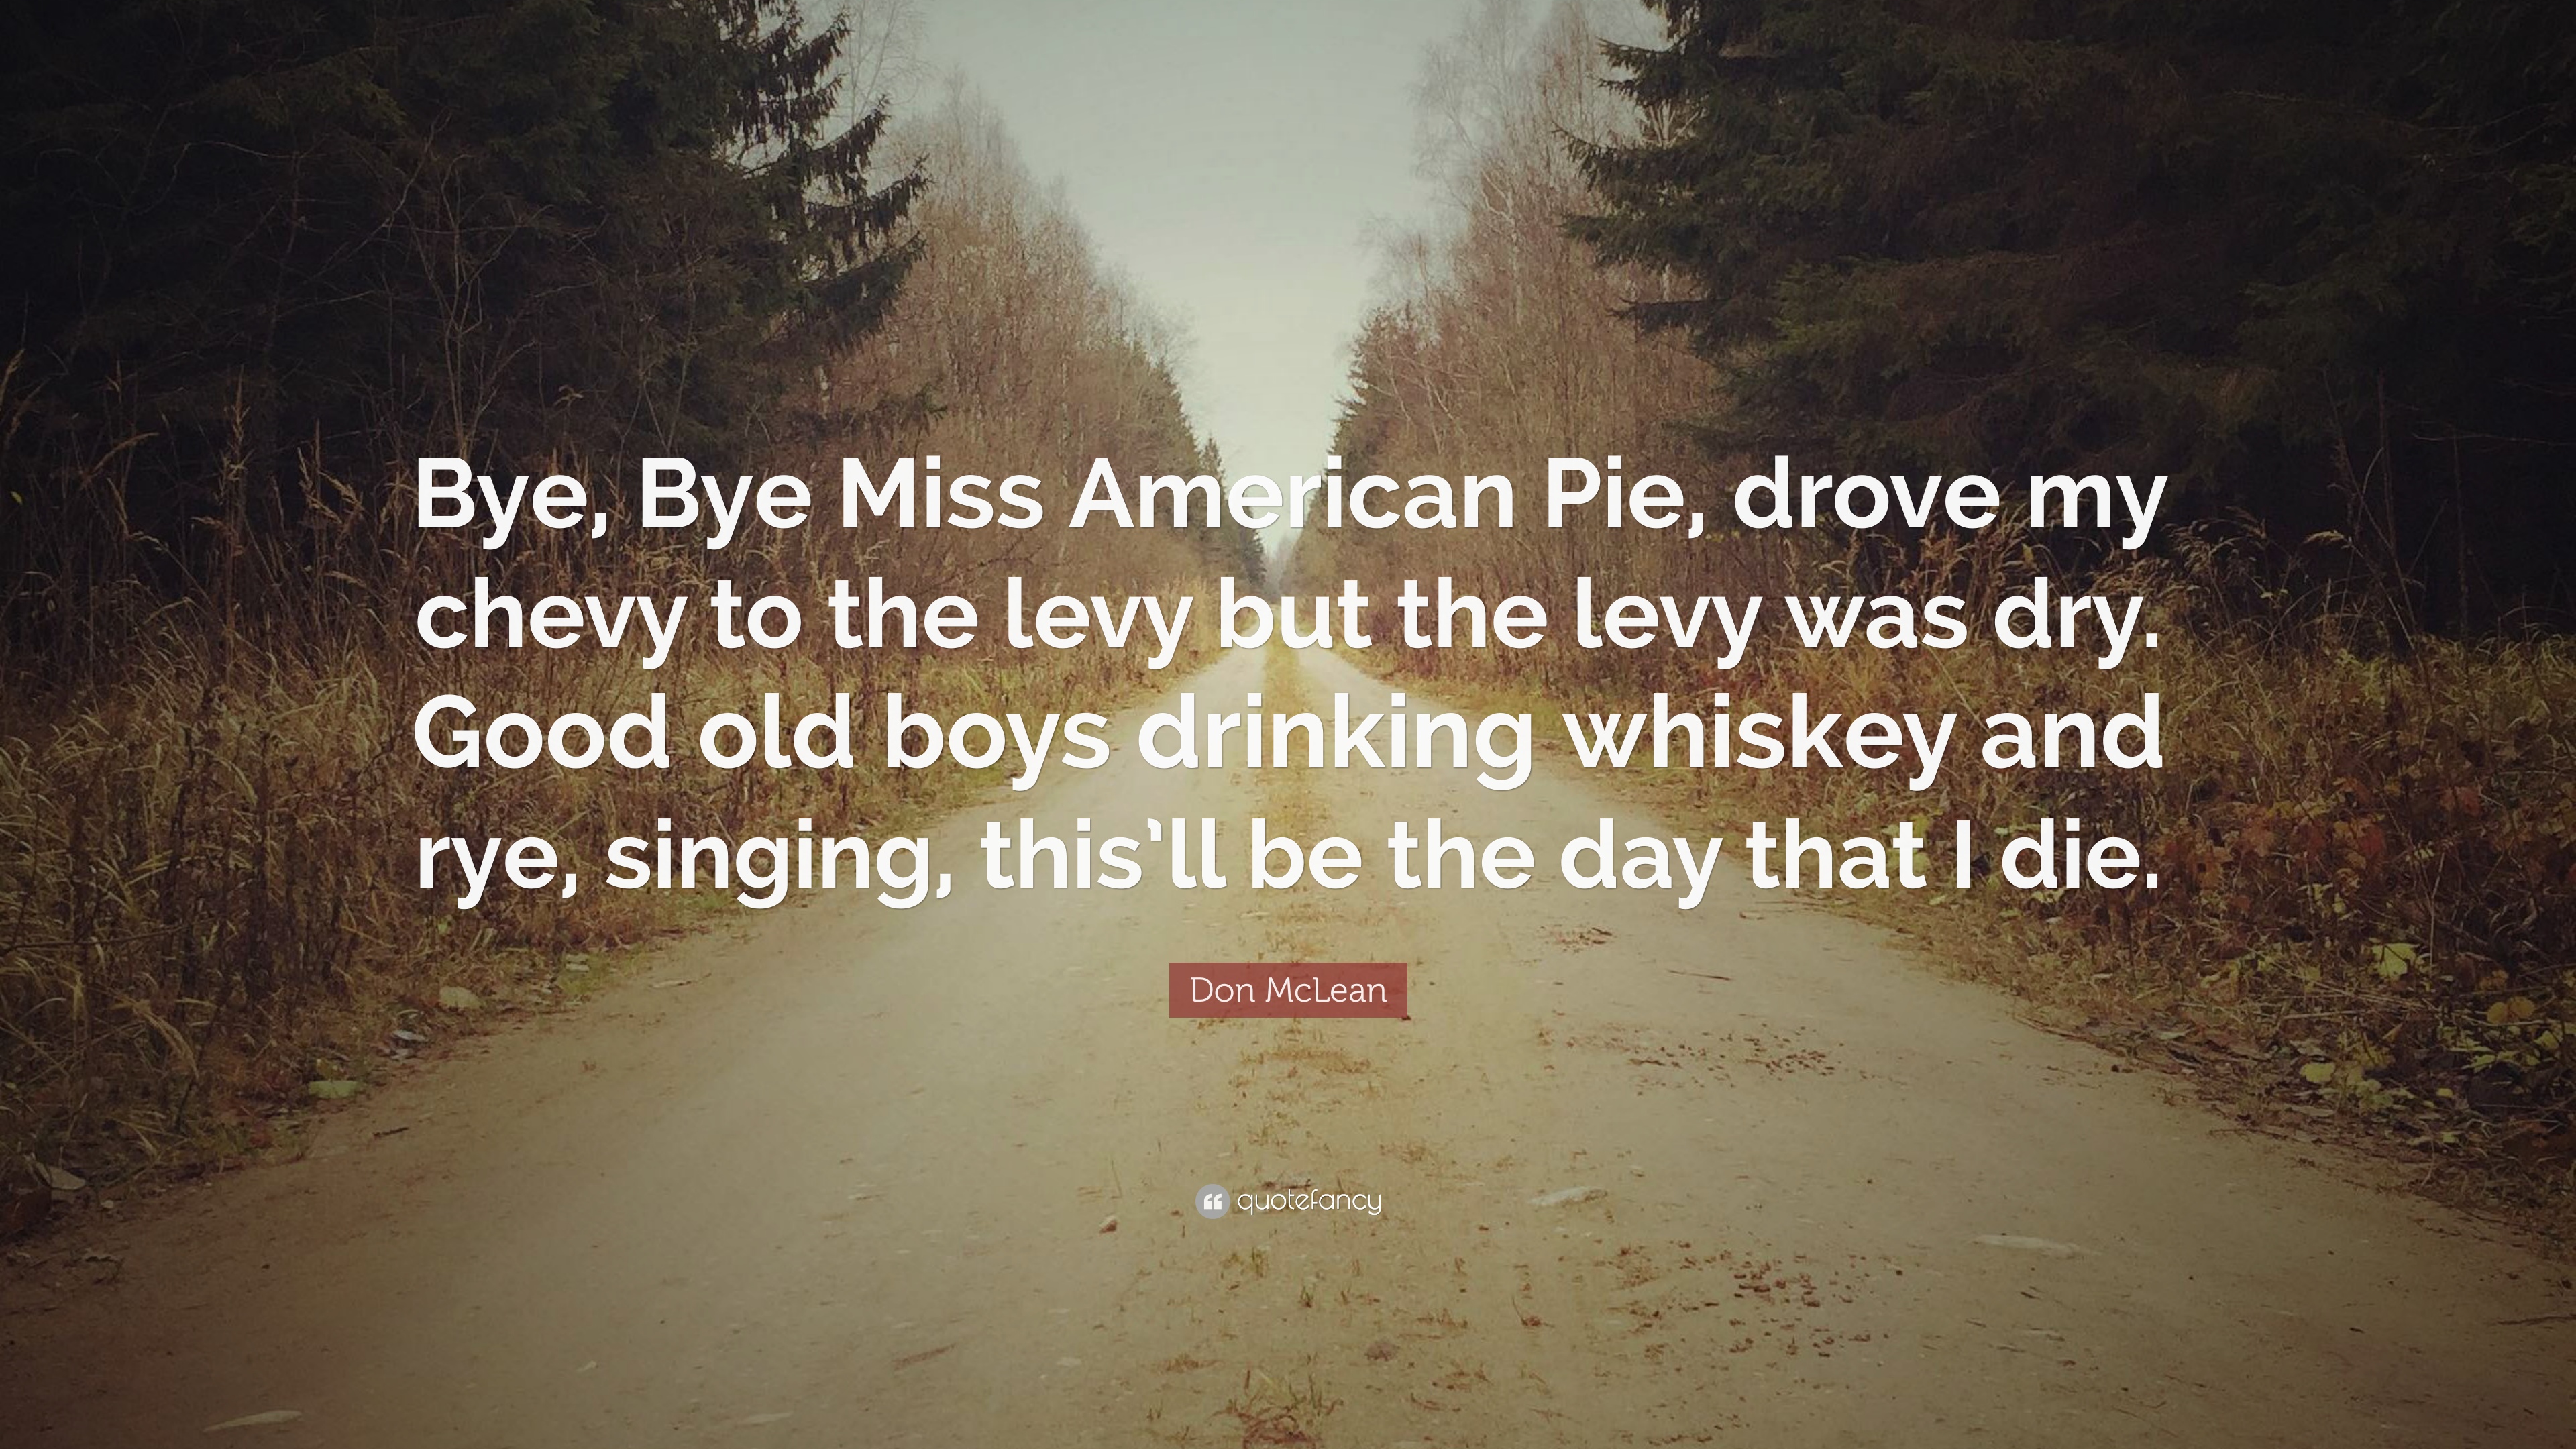 Don McLean Quote: “Bye, Bye Miss American Pie, drove my